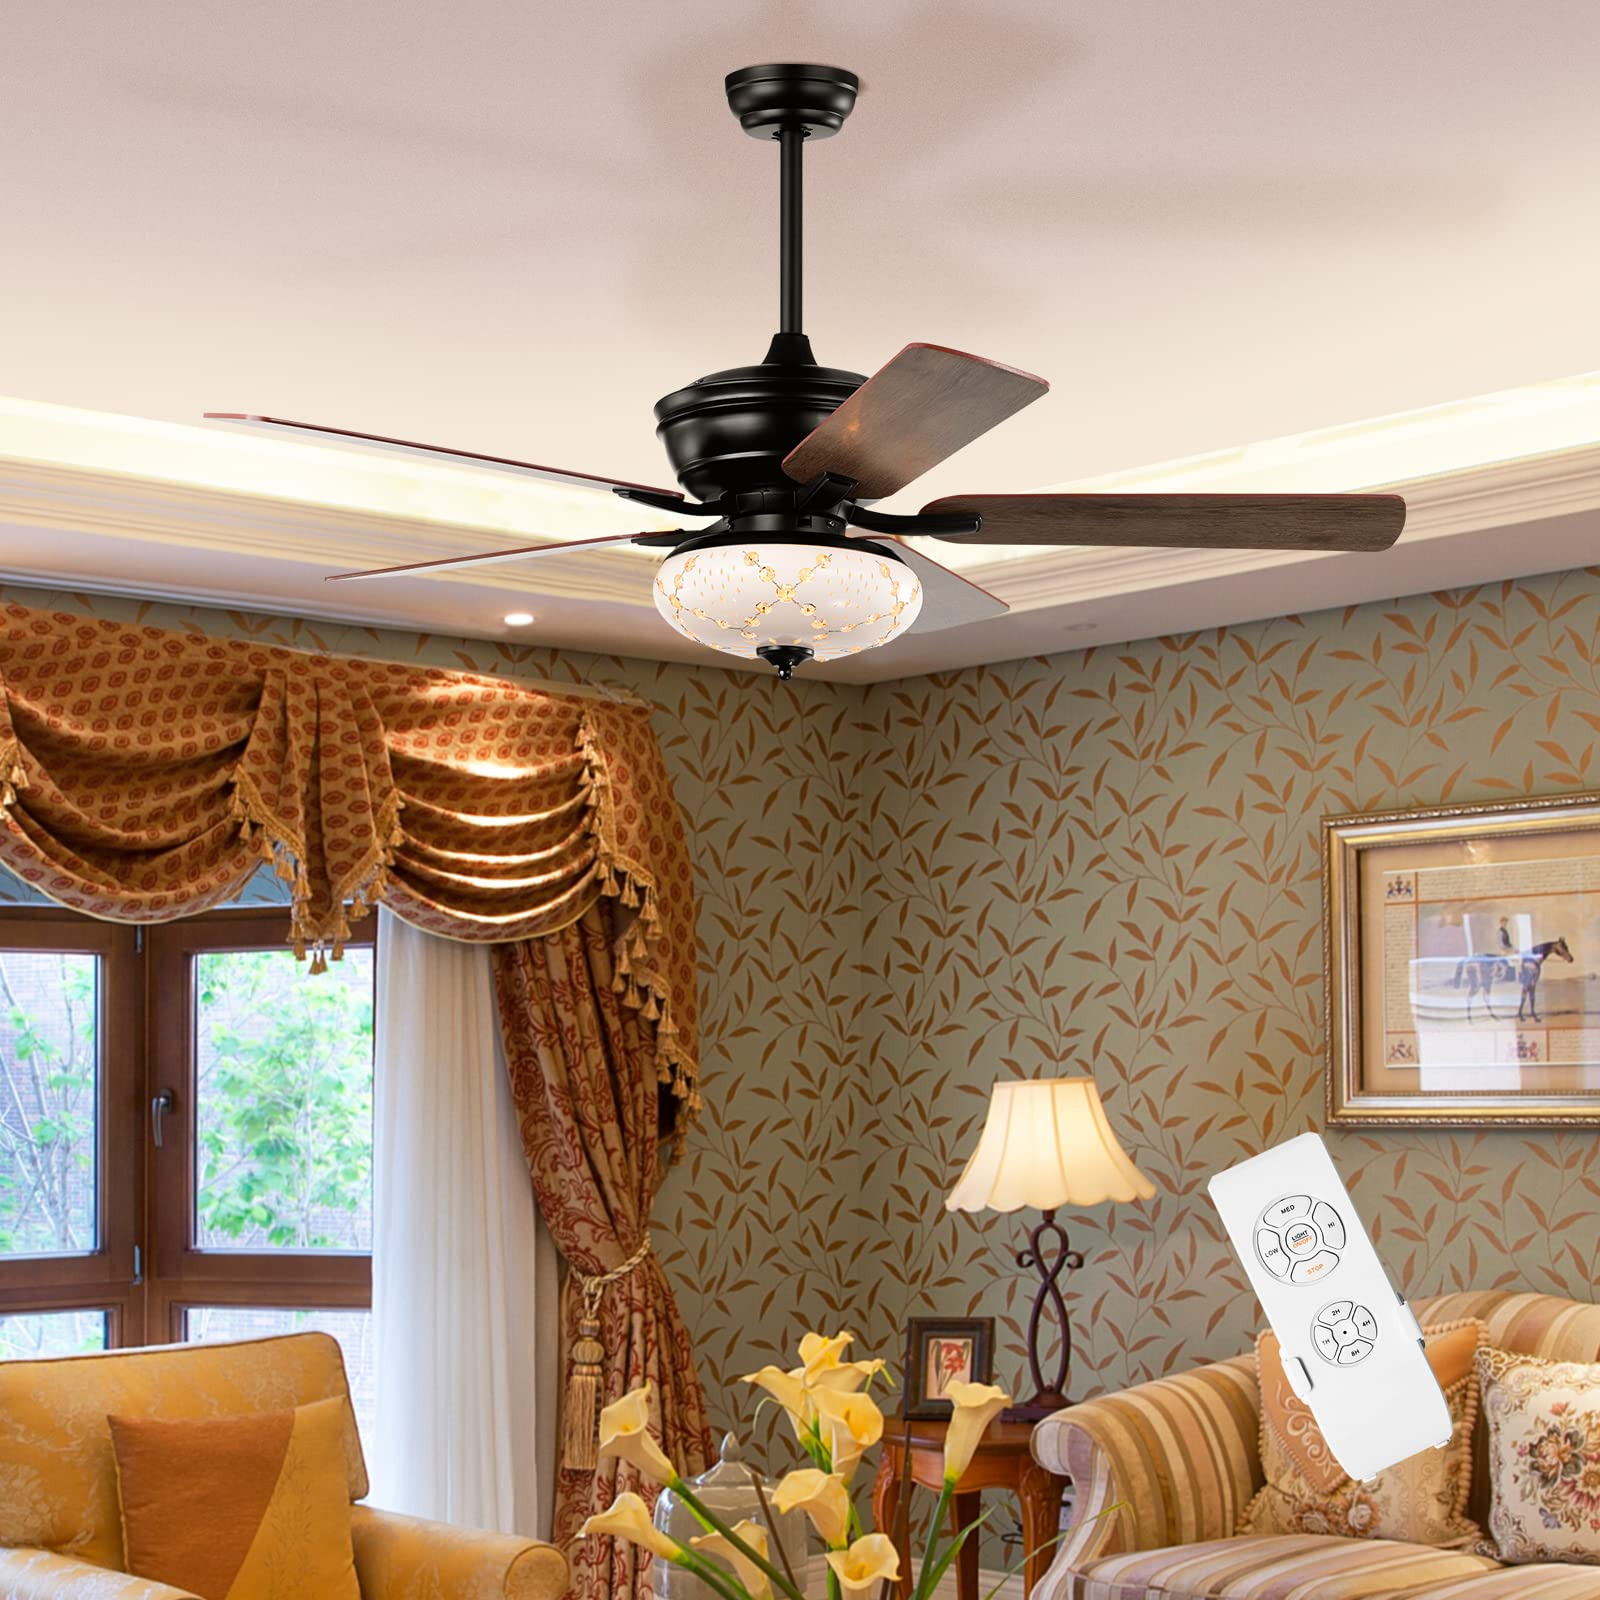 Tangkula 52-Inch Ceiling Fan with Remote Control – tangkula